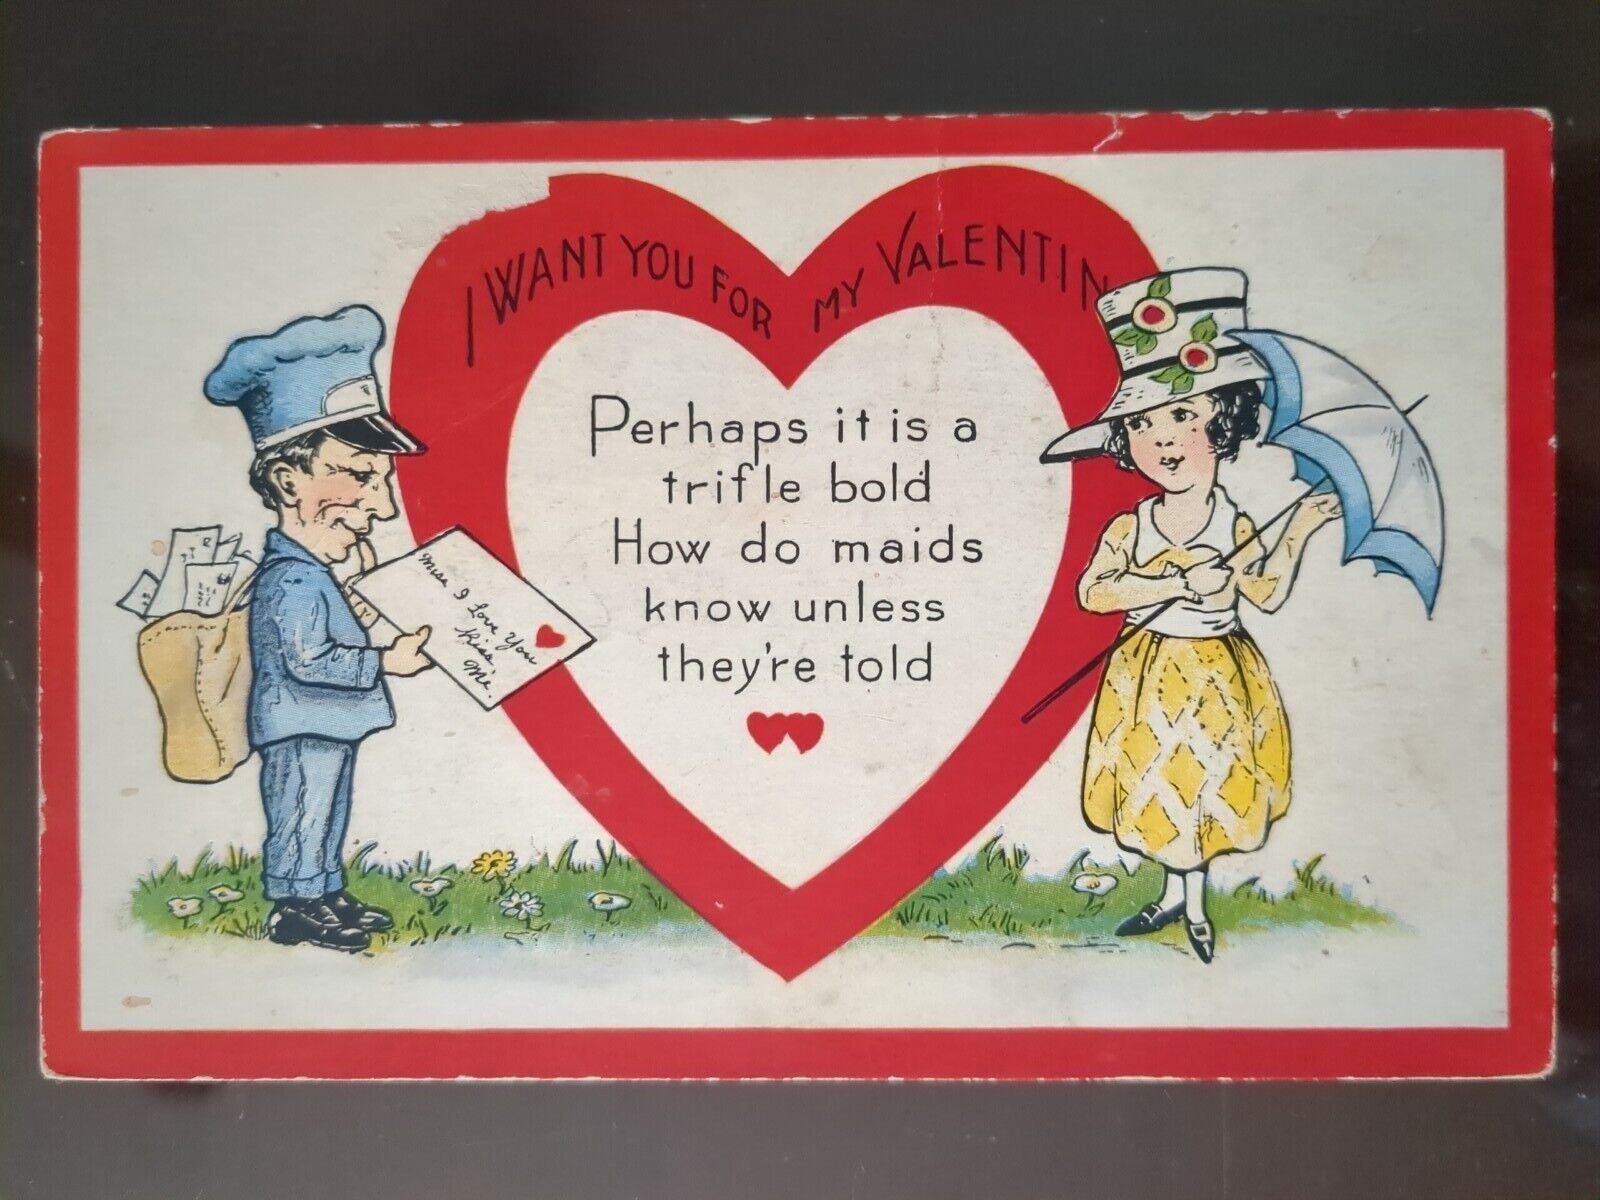 I Want You for My Valentine, Mailman w/ Love Letter - Early 1900s, Wrinkles